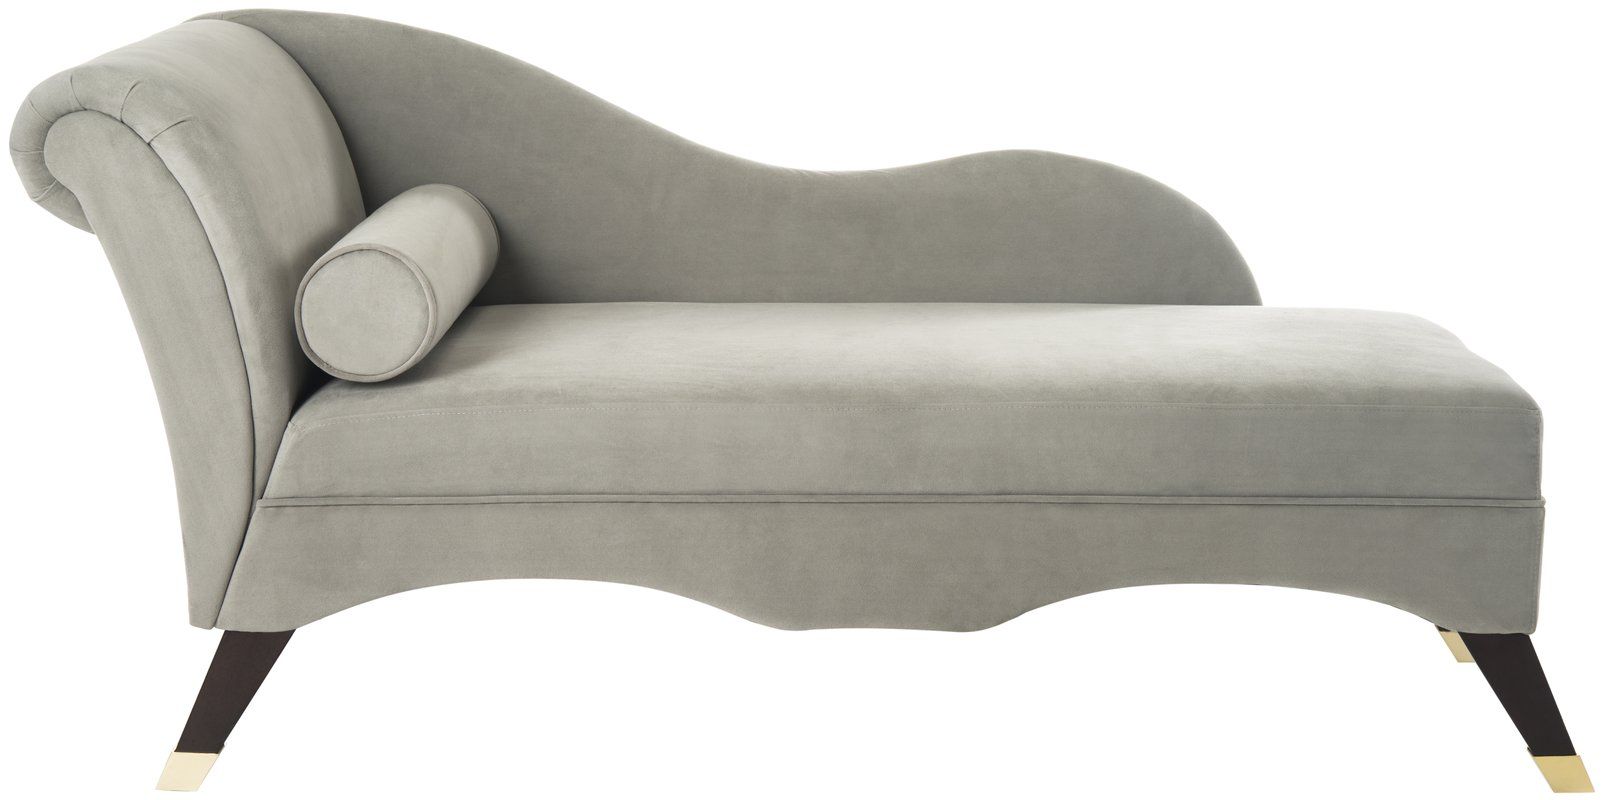 Fainting Couch History - What is a Fainting Couch?